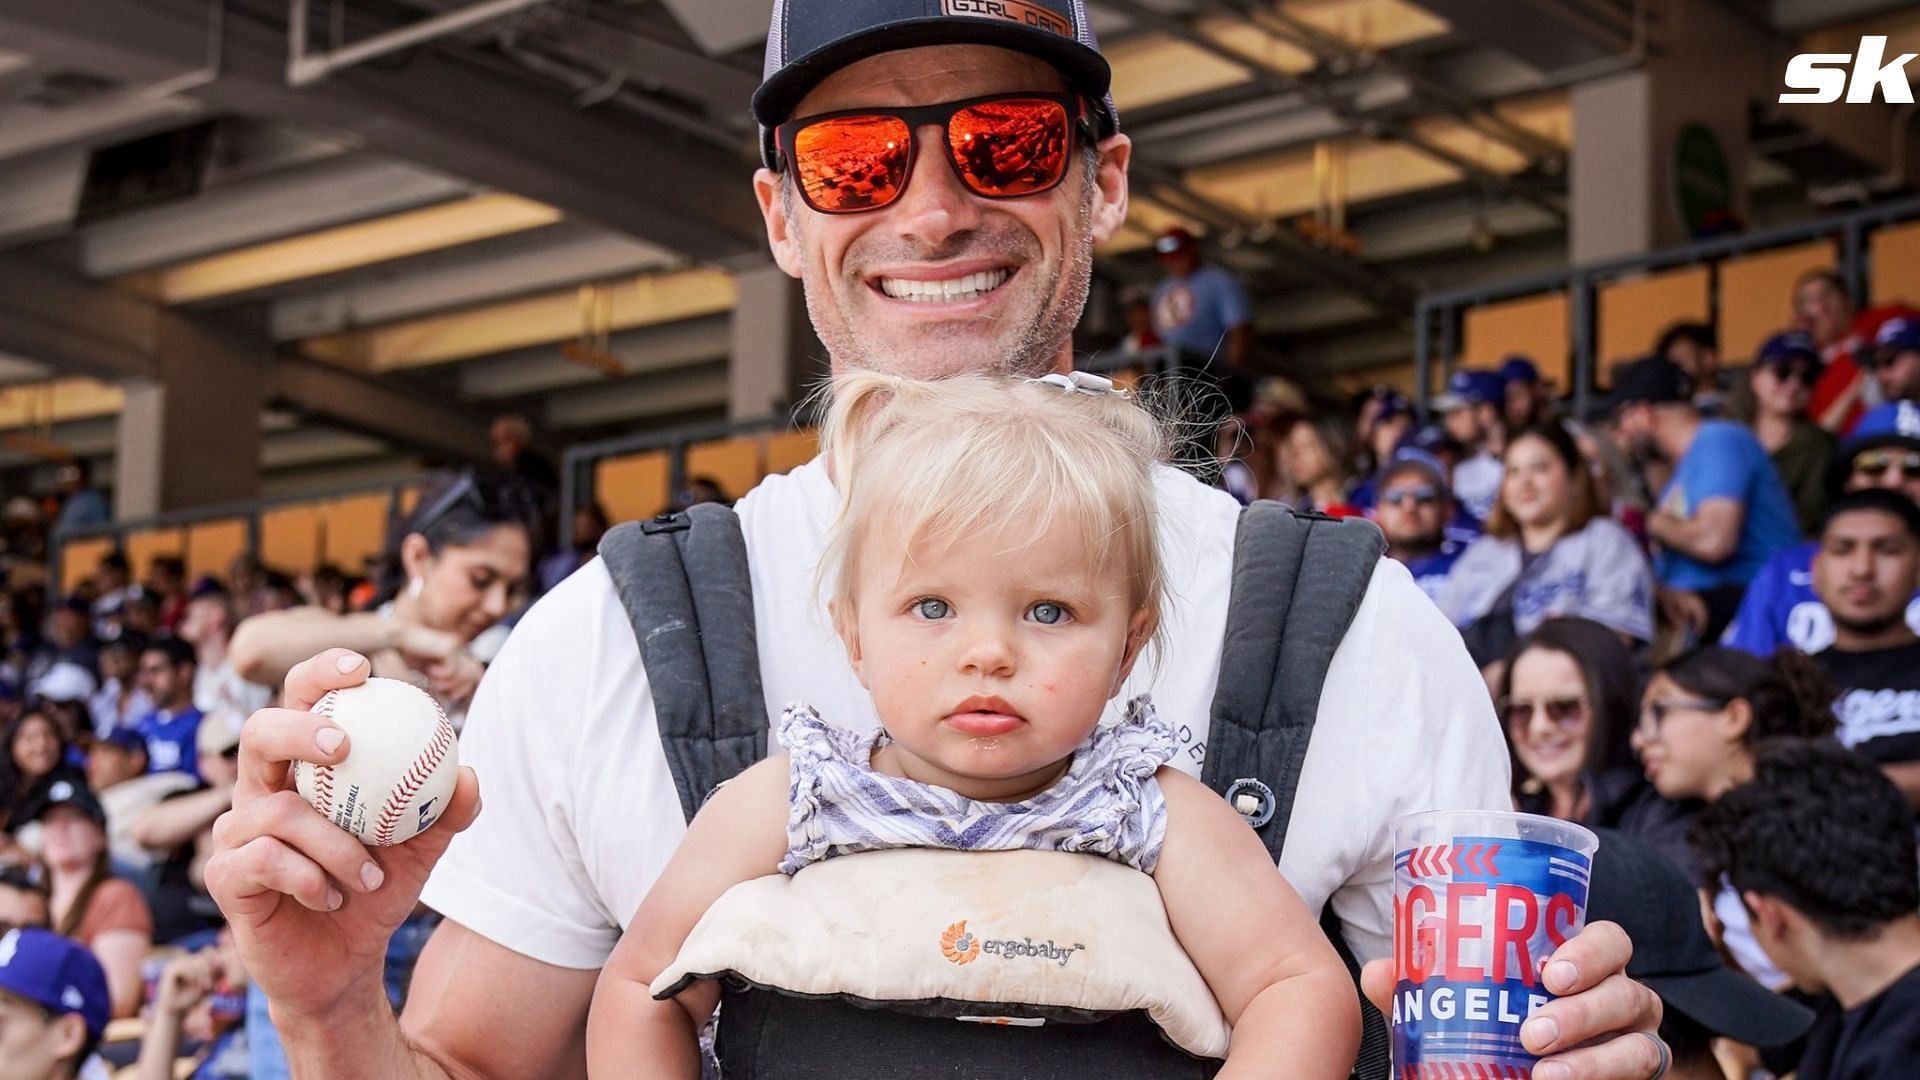 Dodgers Fan Catches Foul Ball While Holding His Baby and a Beer